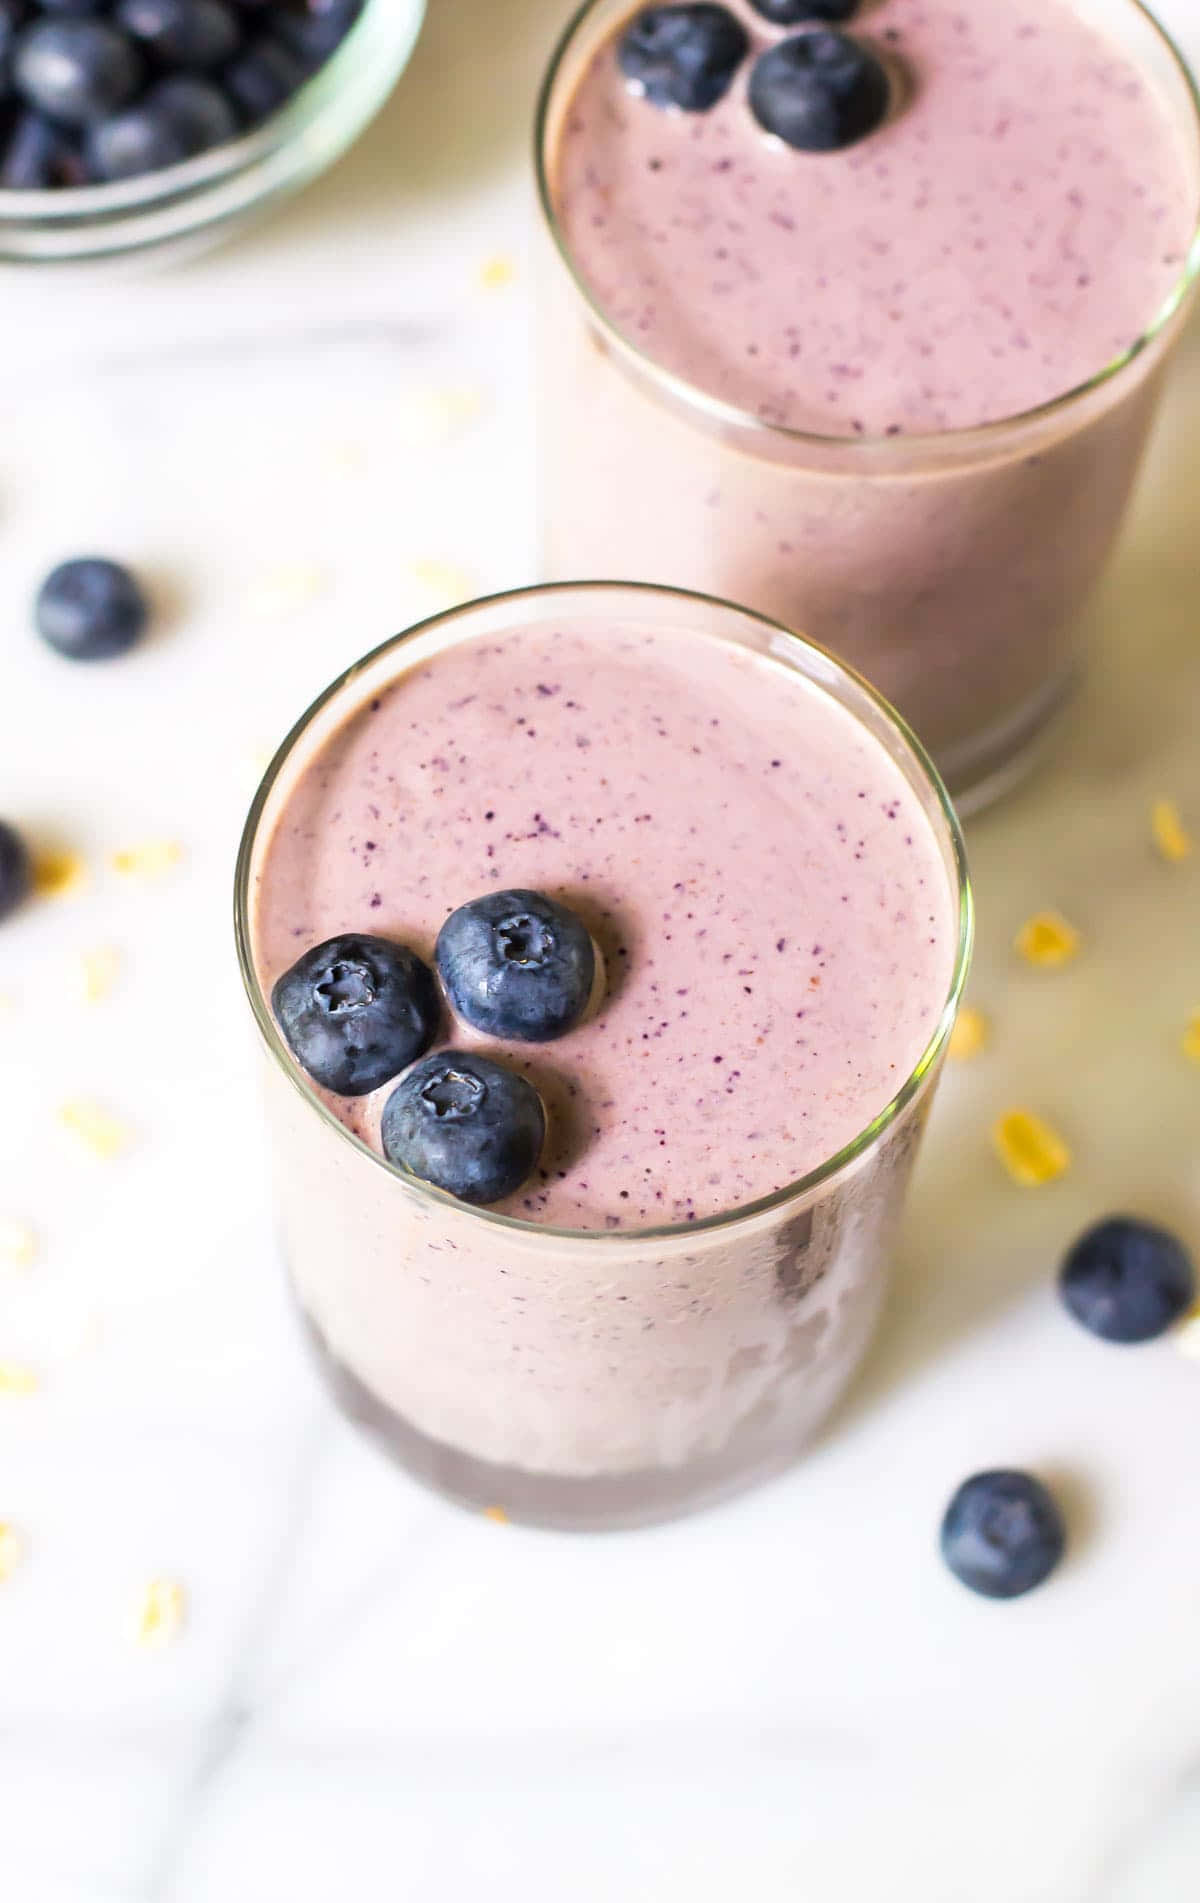 Satisfy your sweet tooth with this fresh and fruity Blueberry Smoothie Wallpaper